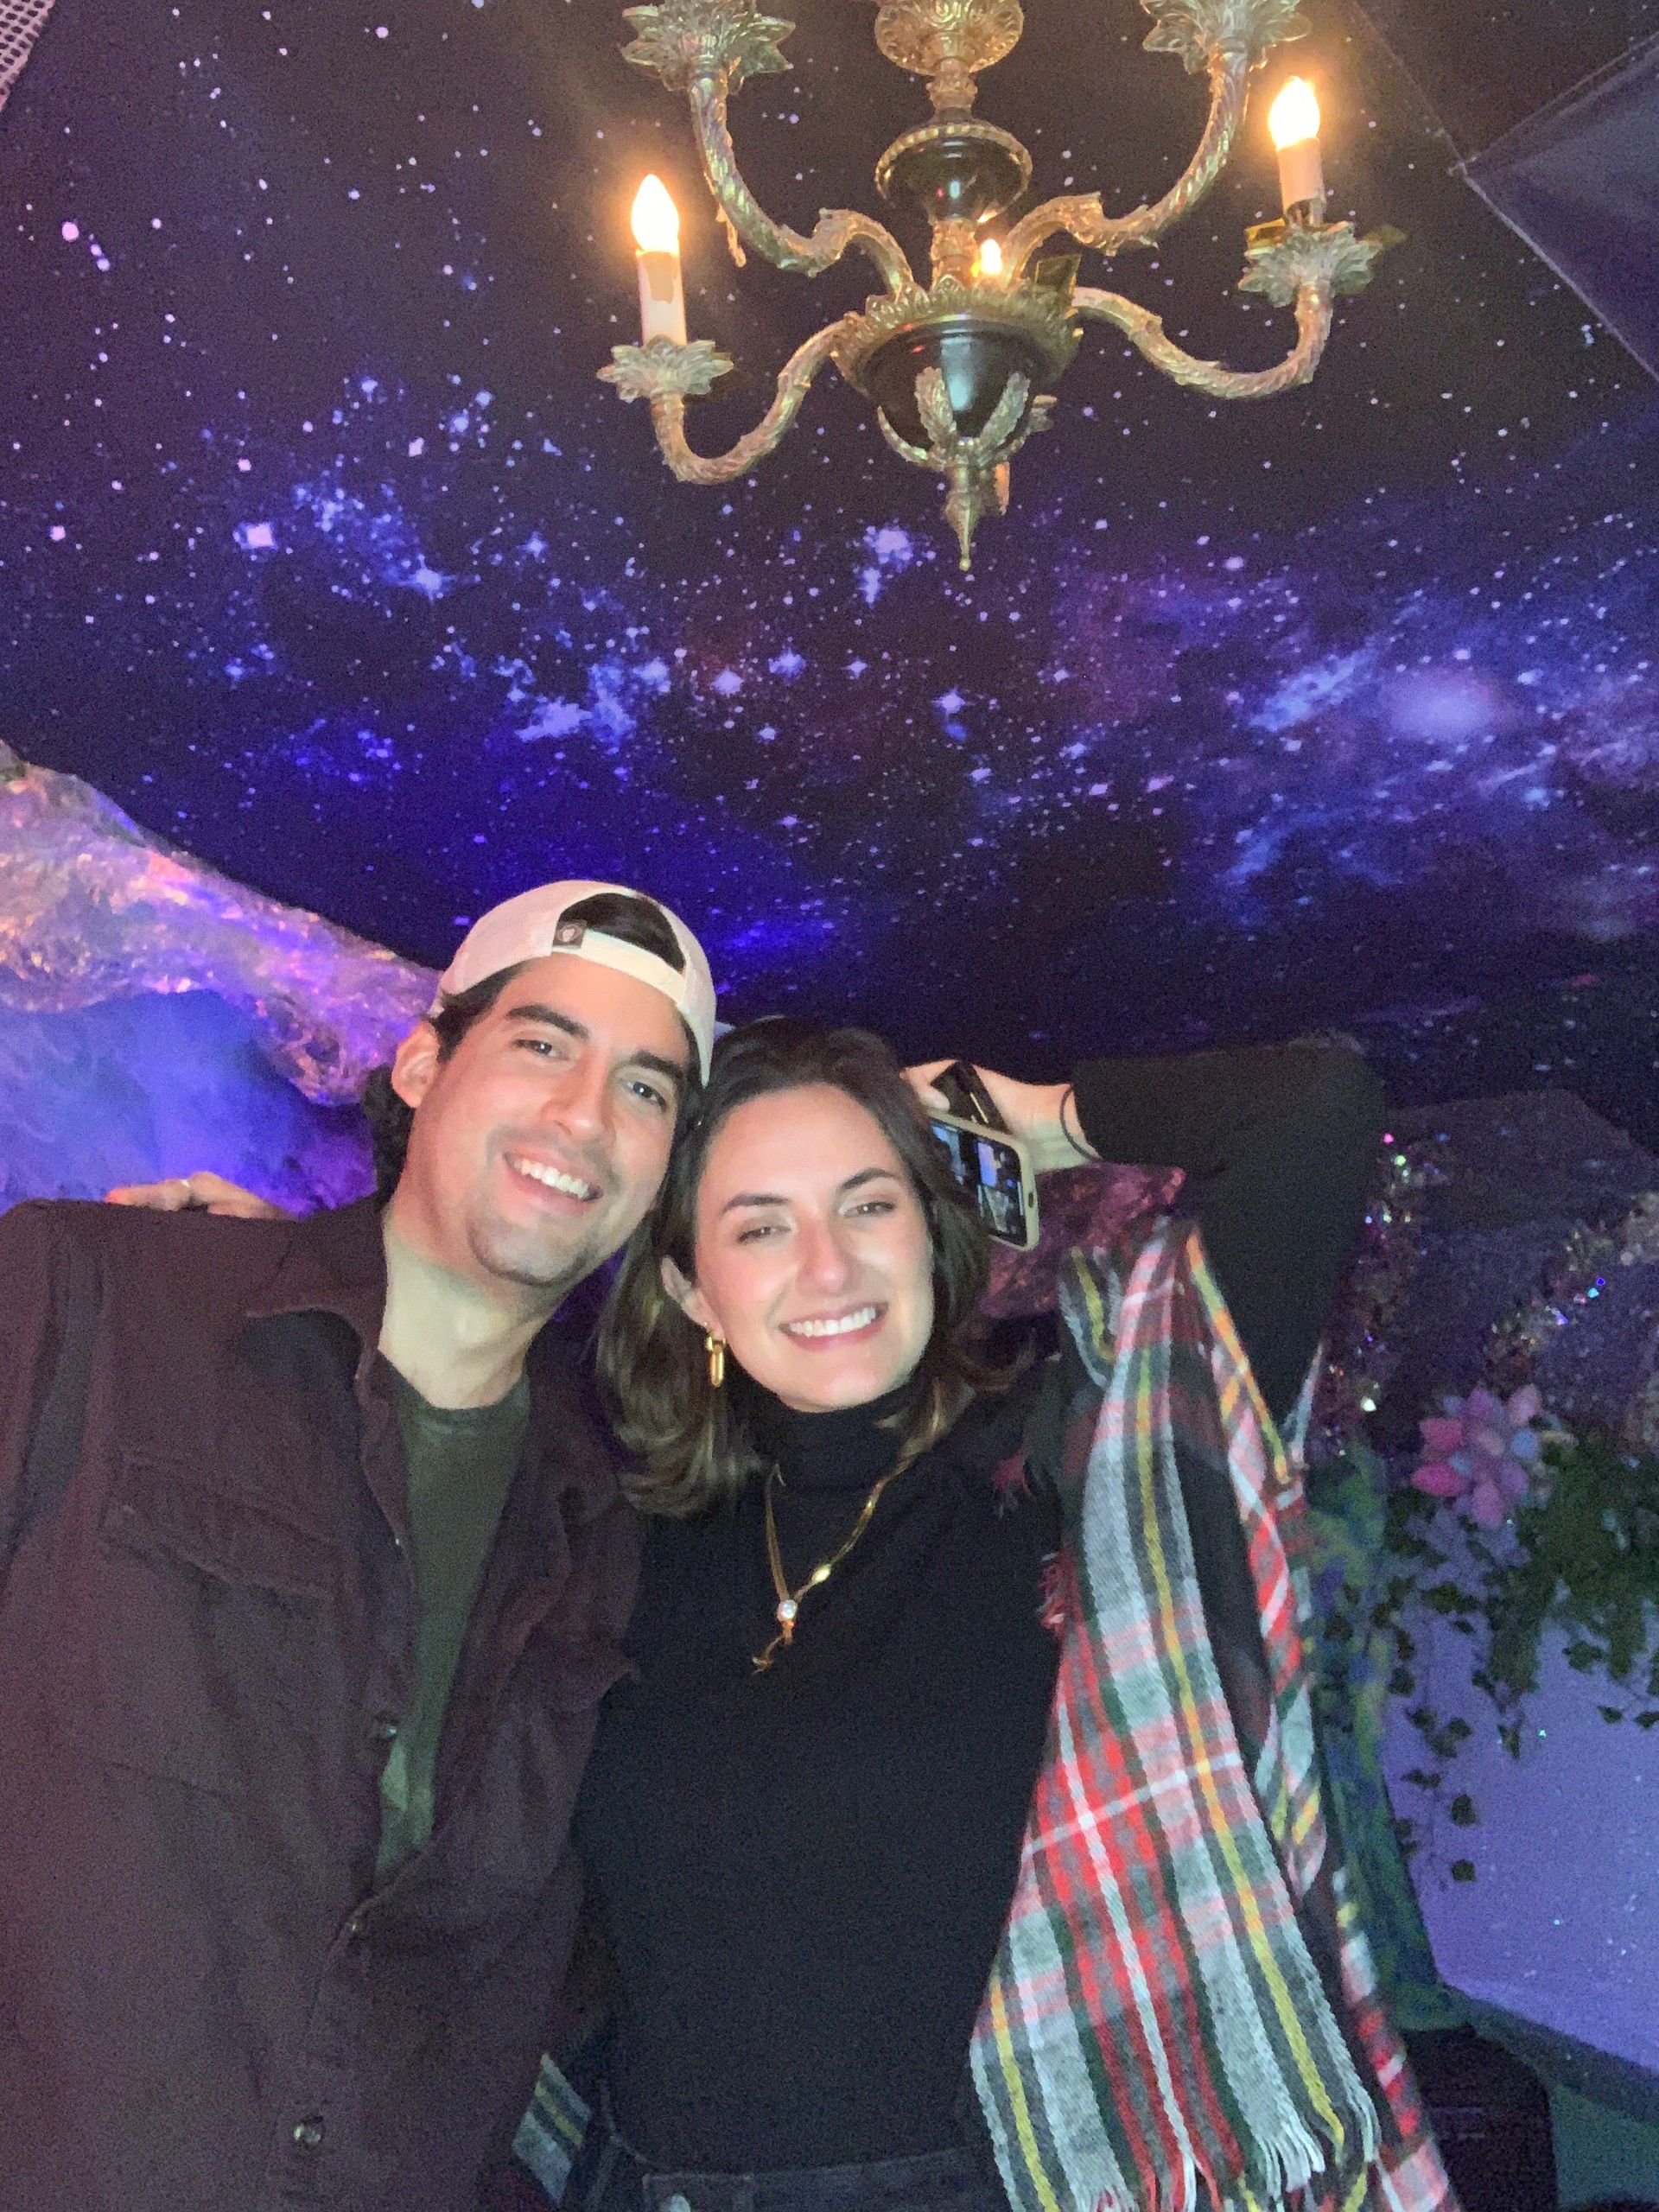 An image of a couple happily posing with the Roamer Photo Booth under a starry ceiling.